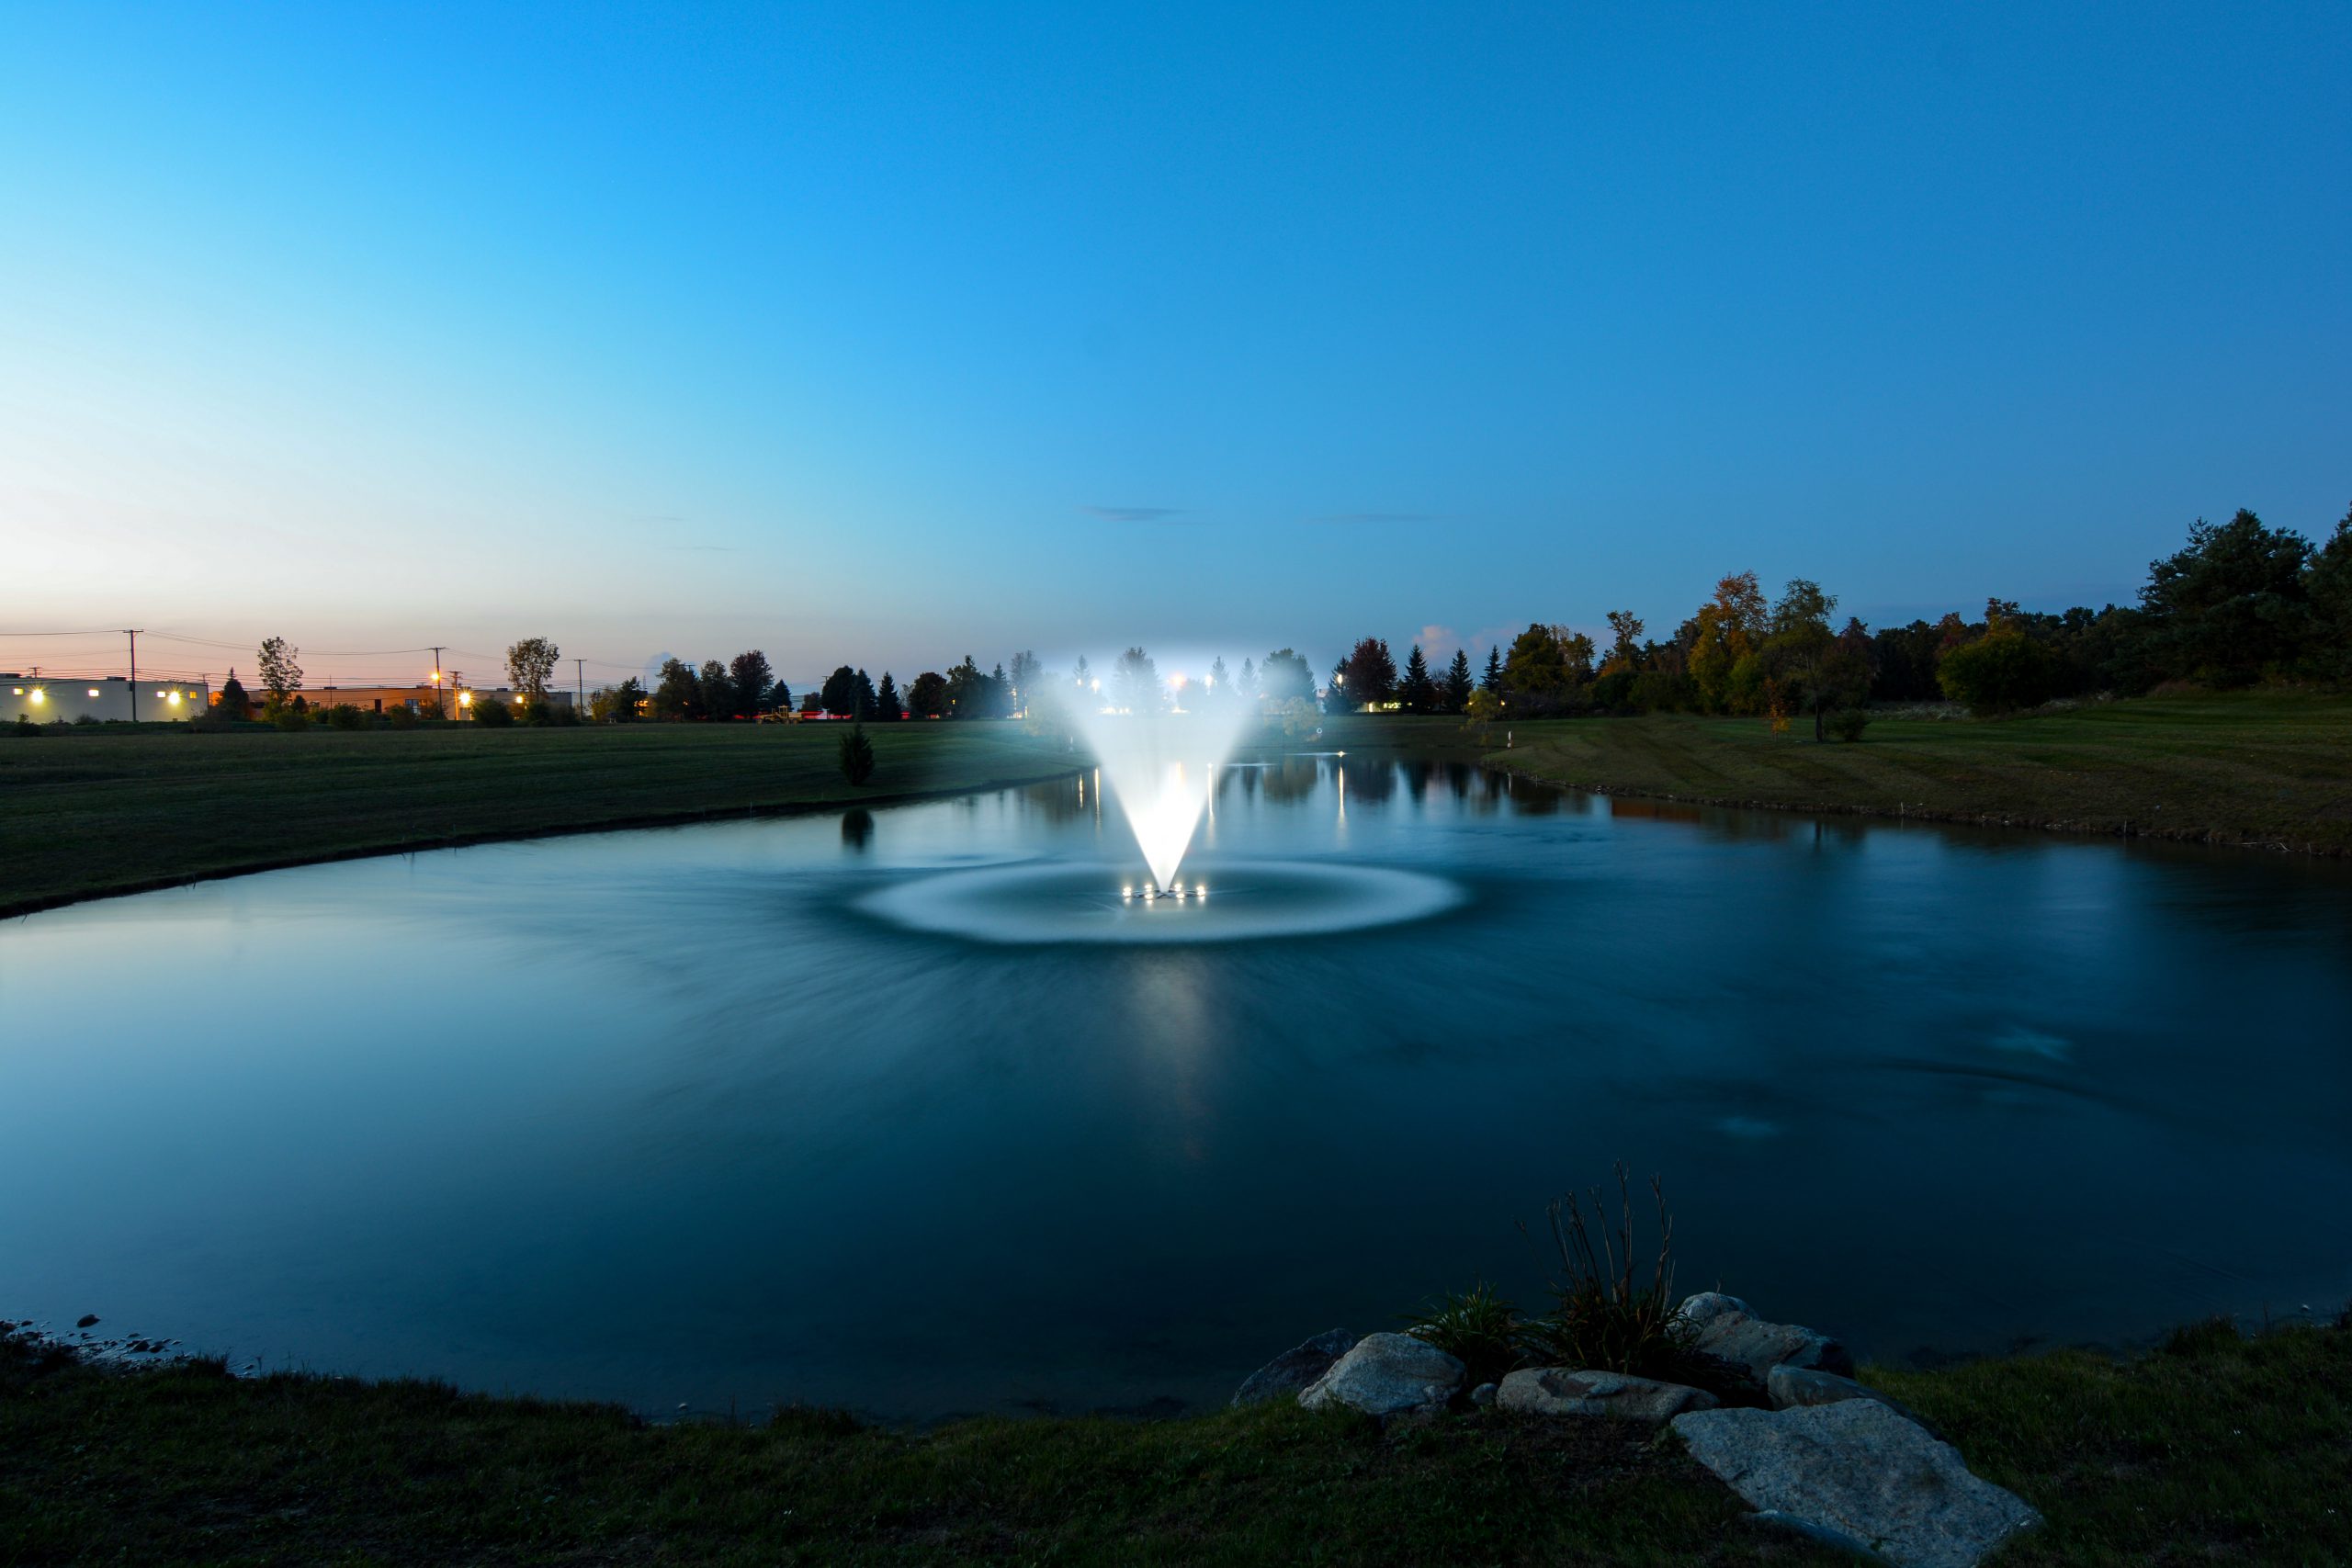 Fountain1 airmax product vendor partner - floating fountains and aeration systems at solitude lake management - improve pond water quality